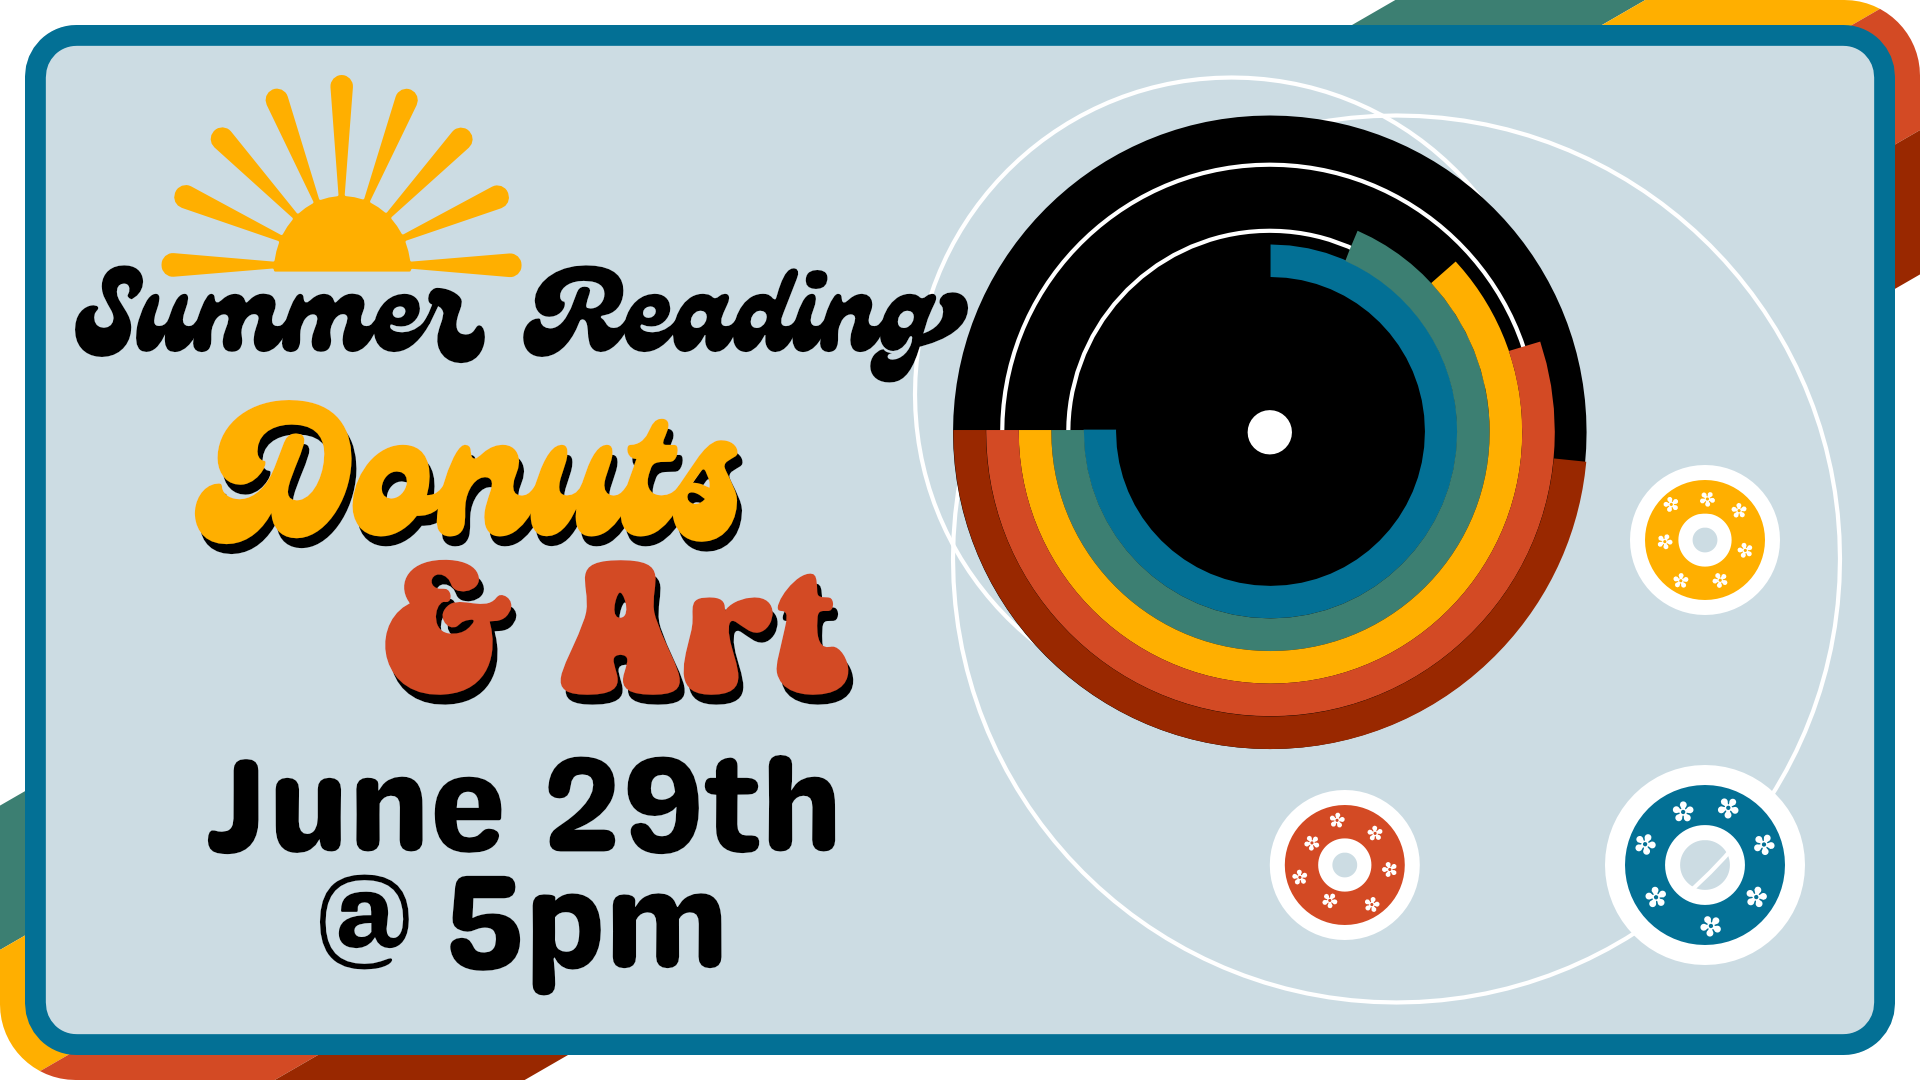 Summer Reading Donuts and Art, June 29th at 5pm